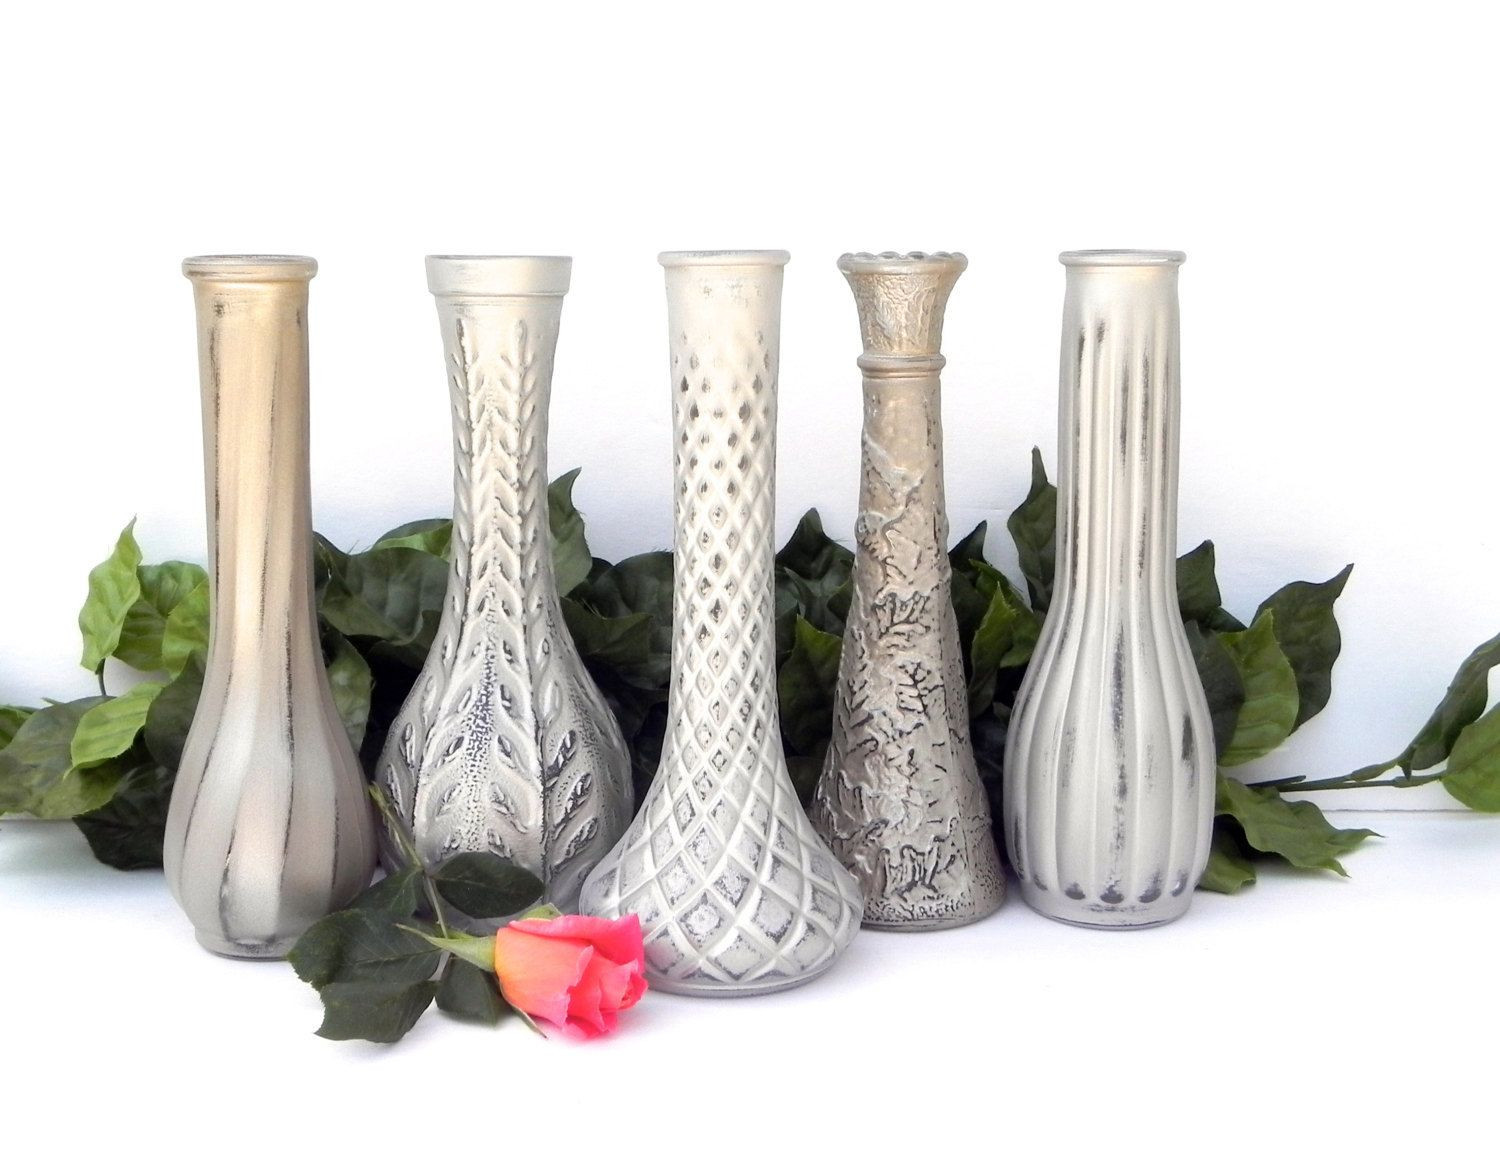 24 Popular Silver Vases Bulk 2024 free download silver vases bulk of silver bud vases gallery metallic shabby chic bud vases nickel throughout silver bud vases gallery metallic shabby chic bud vases nickel silver and by glasscastle2 of si